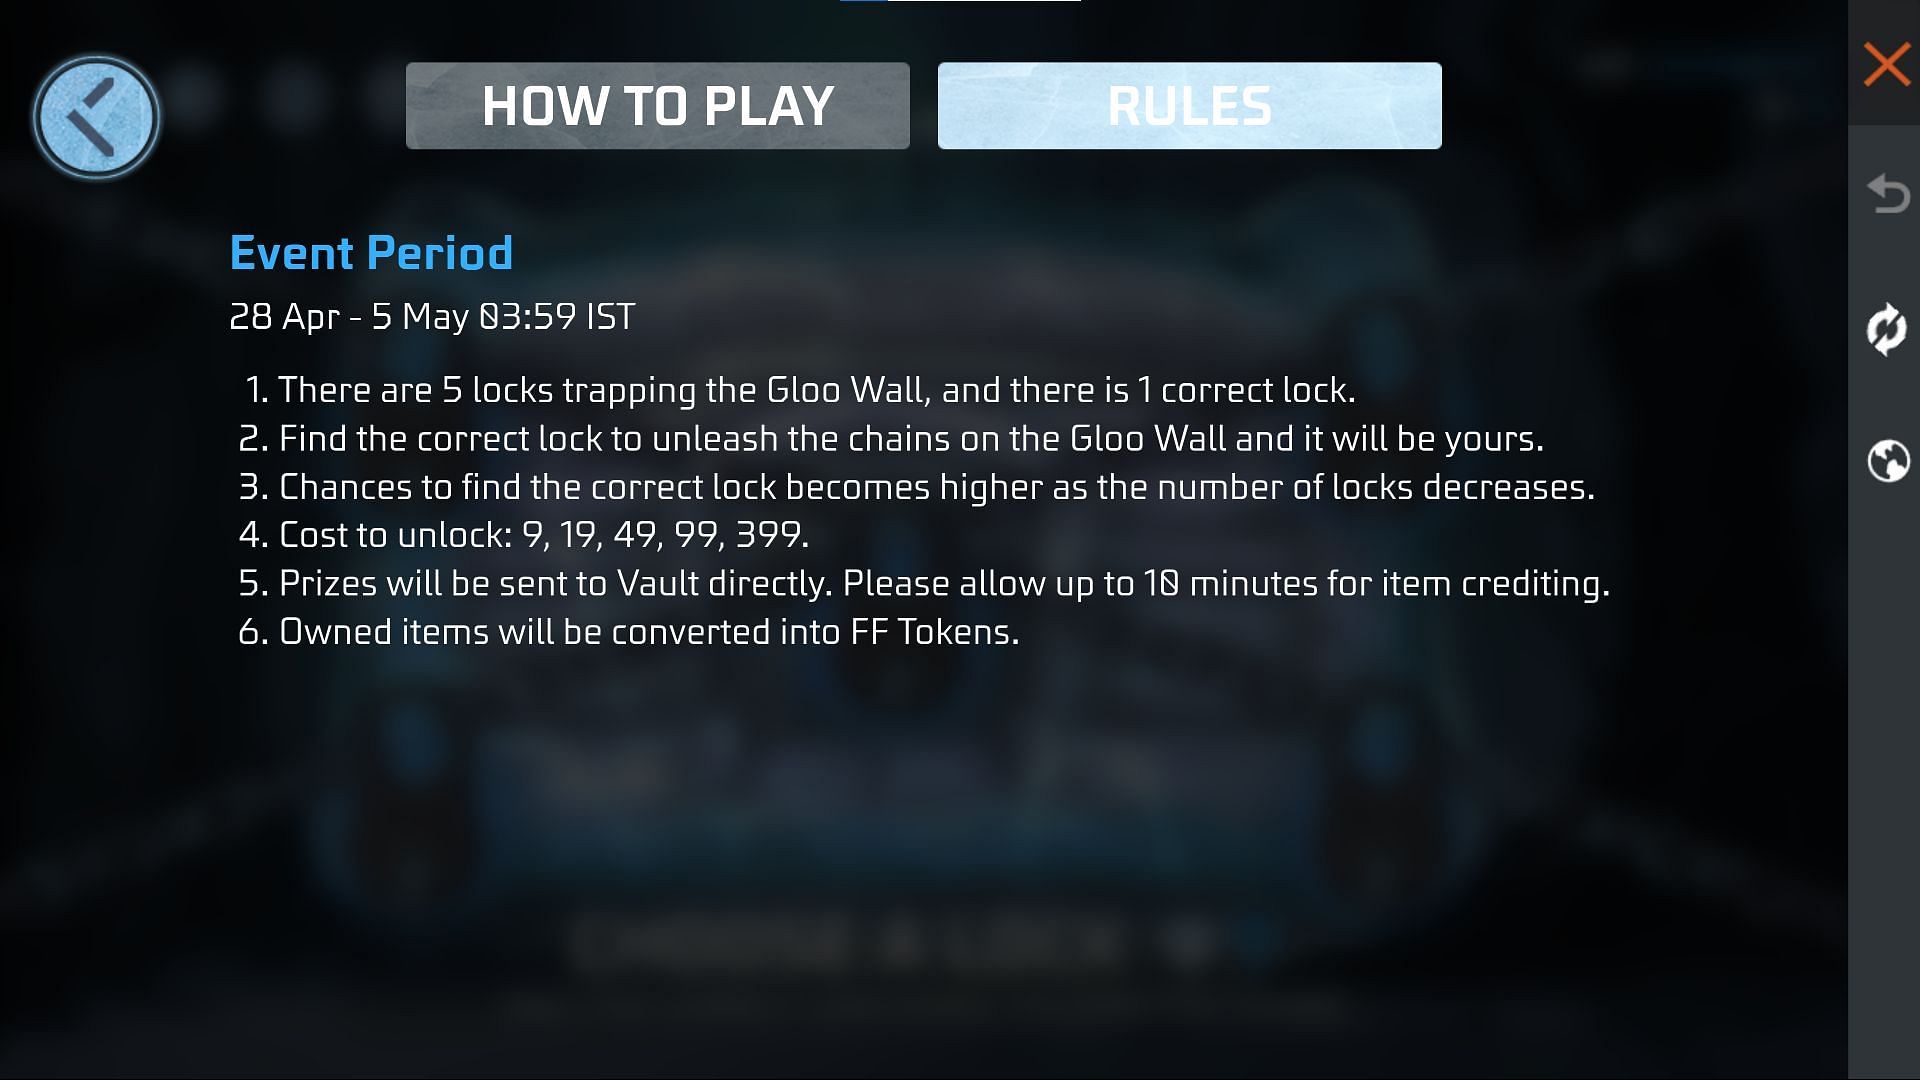 The event rules and regulations (Image via Garena)